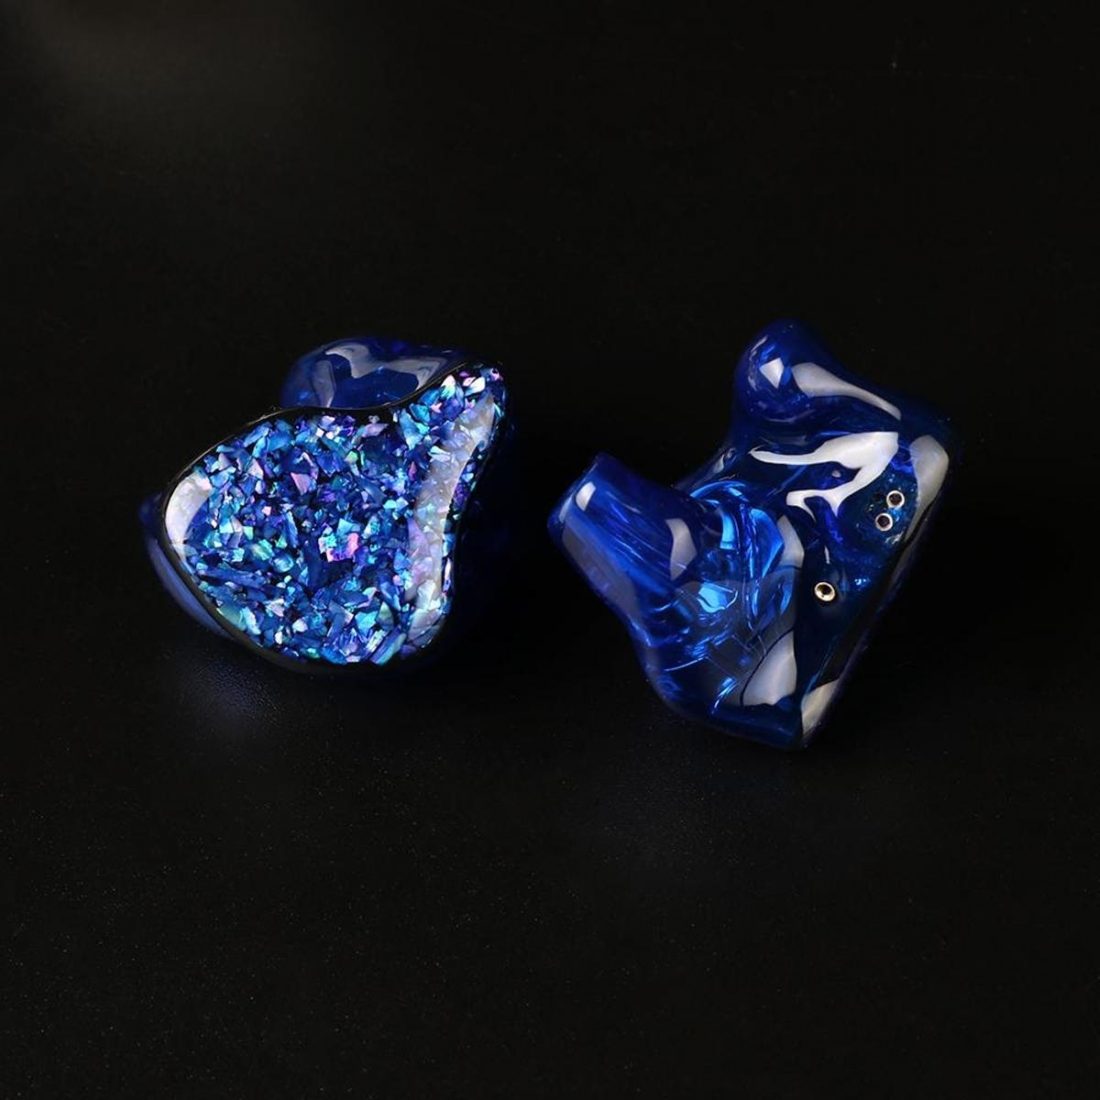 The Legacy 3 in CIEM Blue-AW11 shells. (From linsoul.com.jpg)